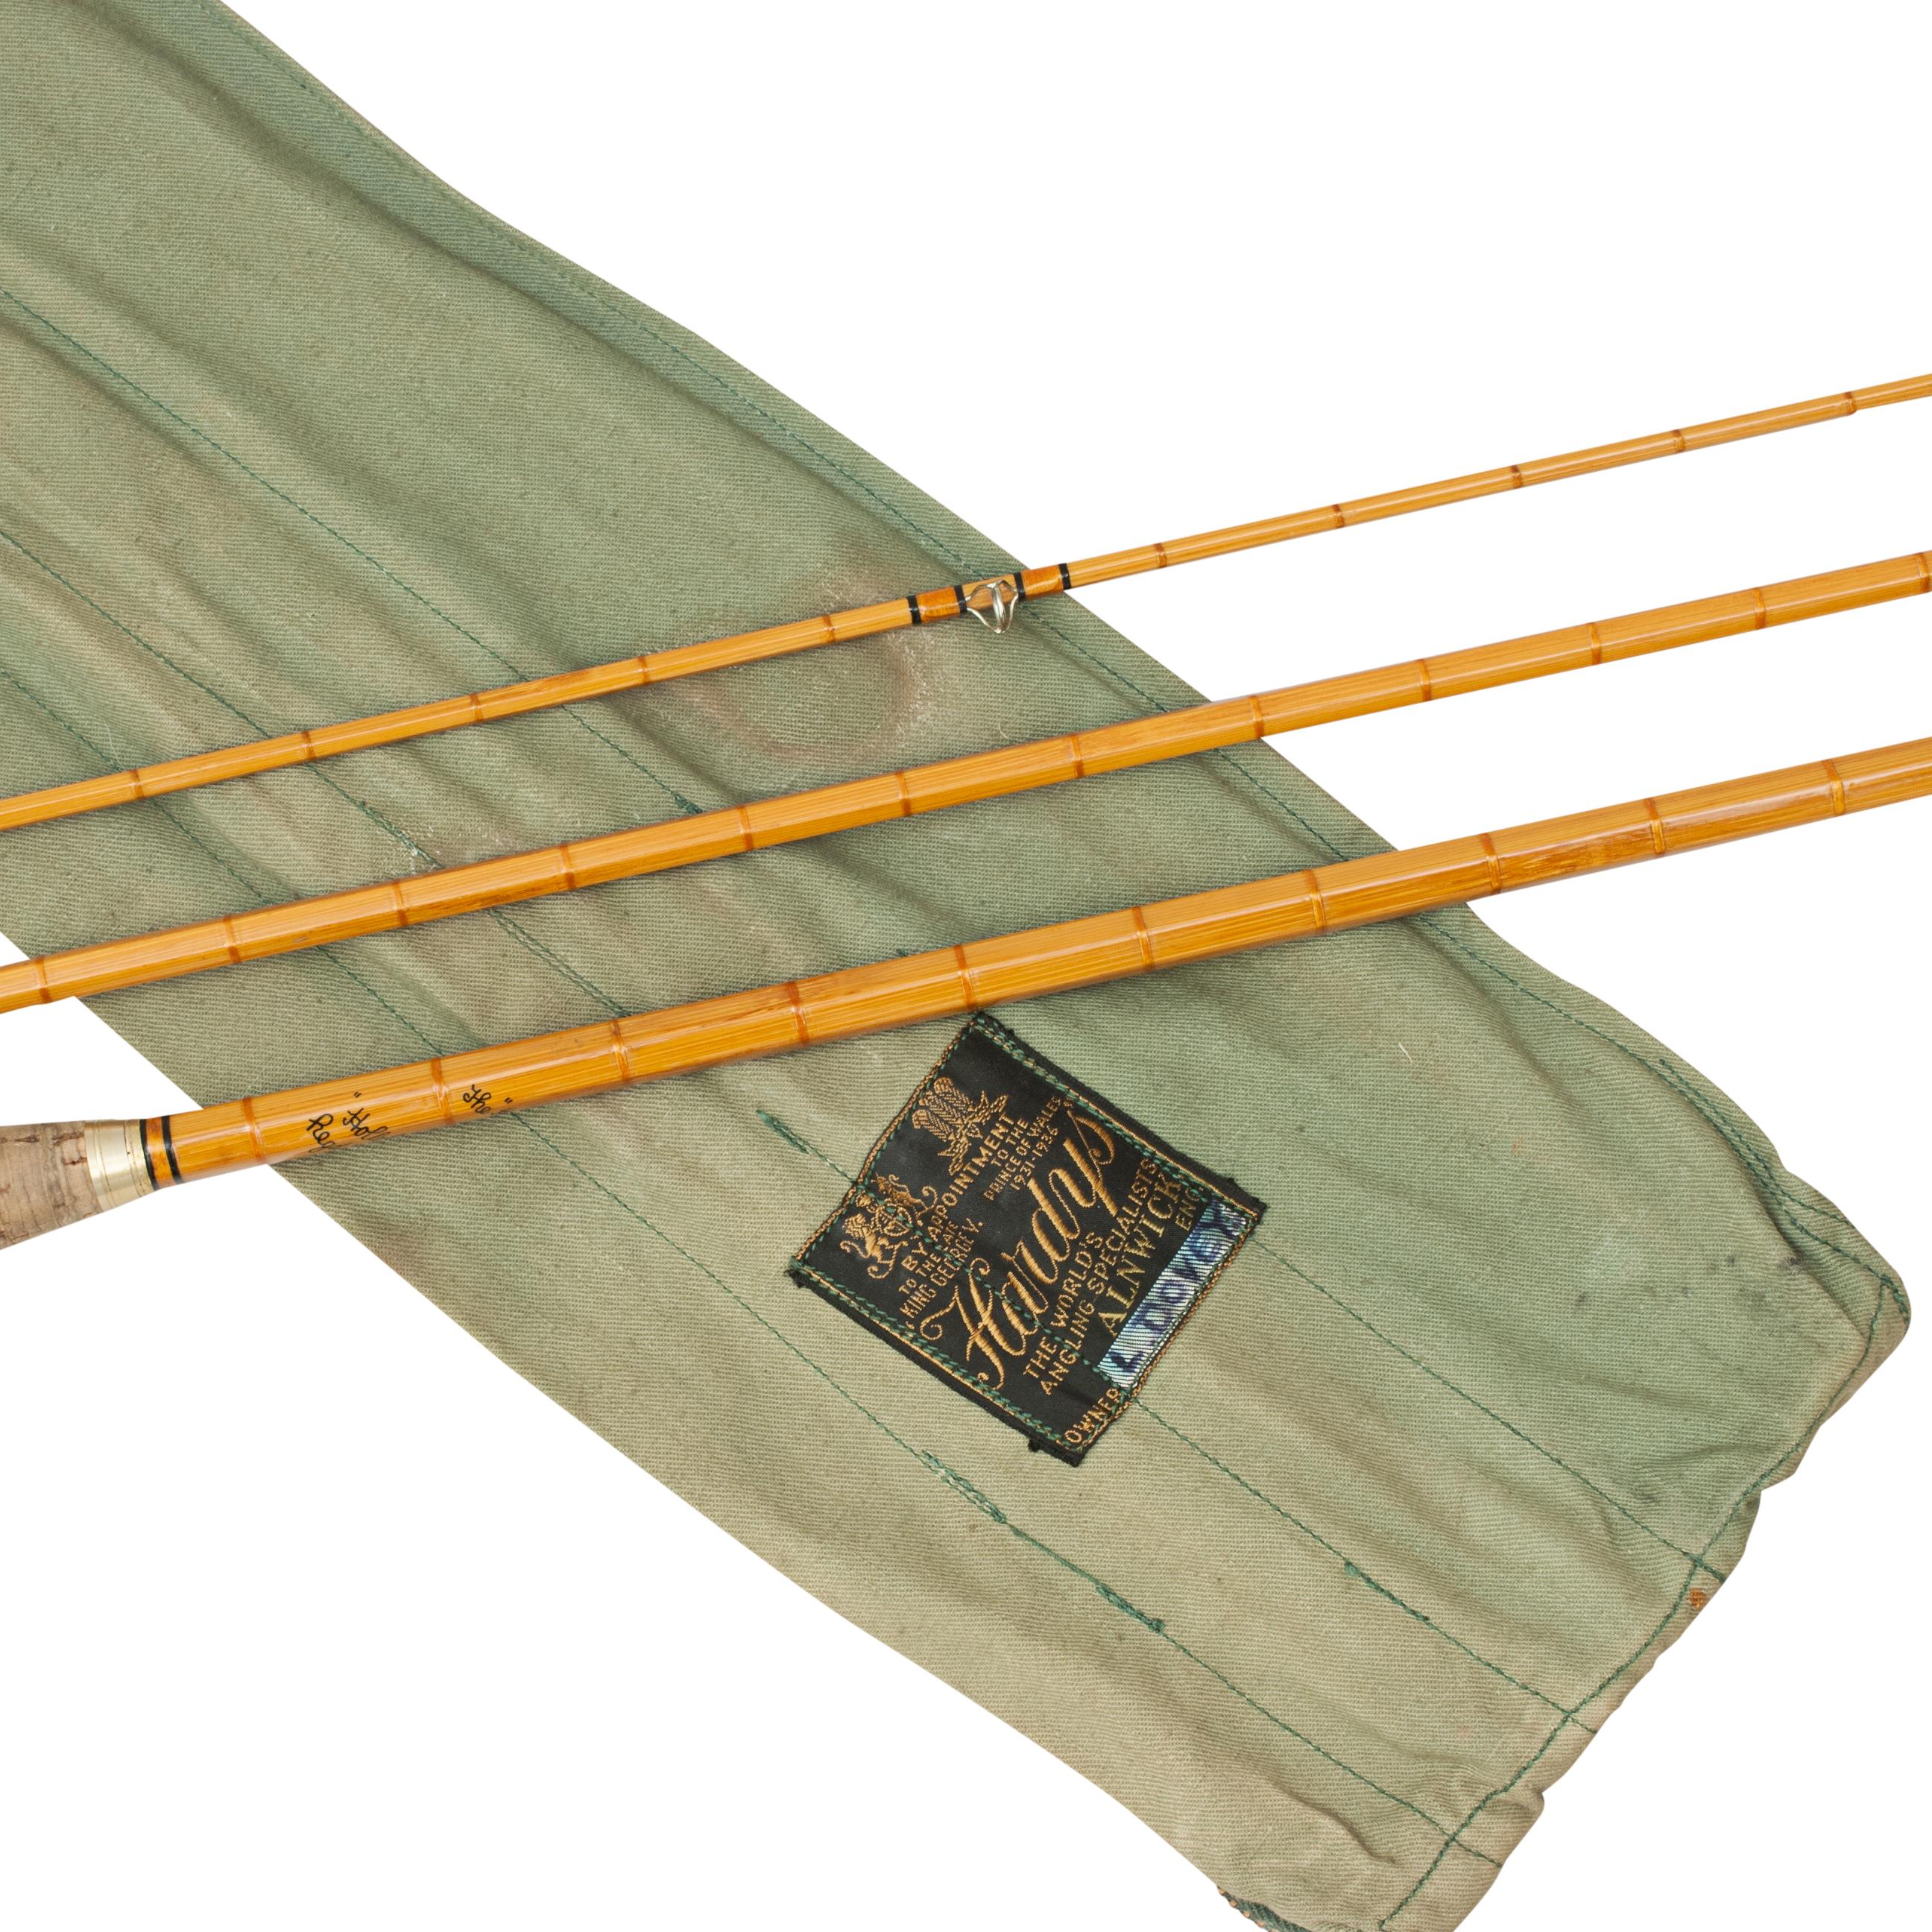 Vintage Cane Fly Fishing Rods - 4 For Sale on 1stDibs